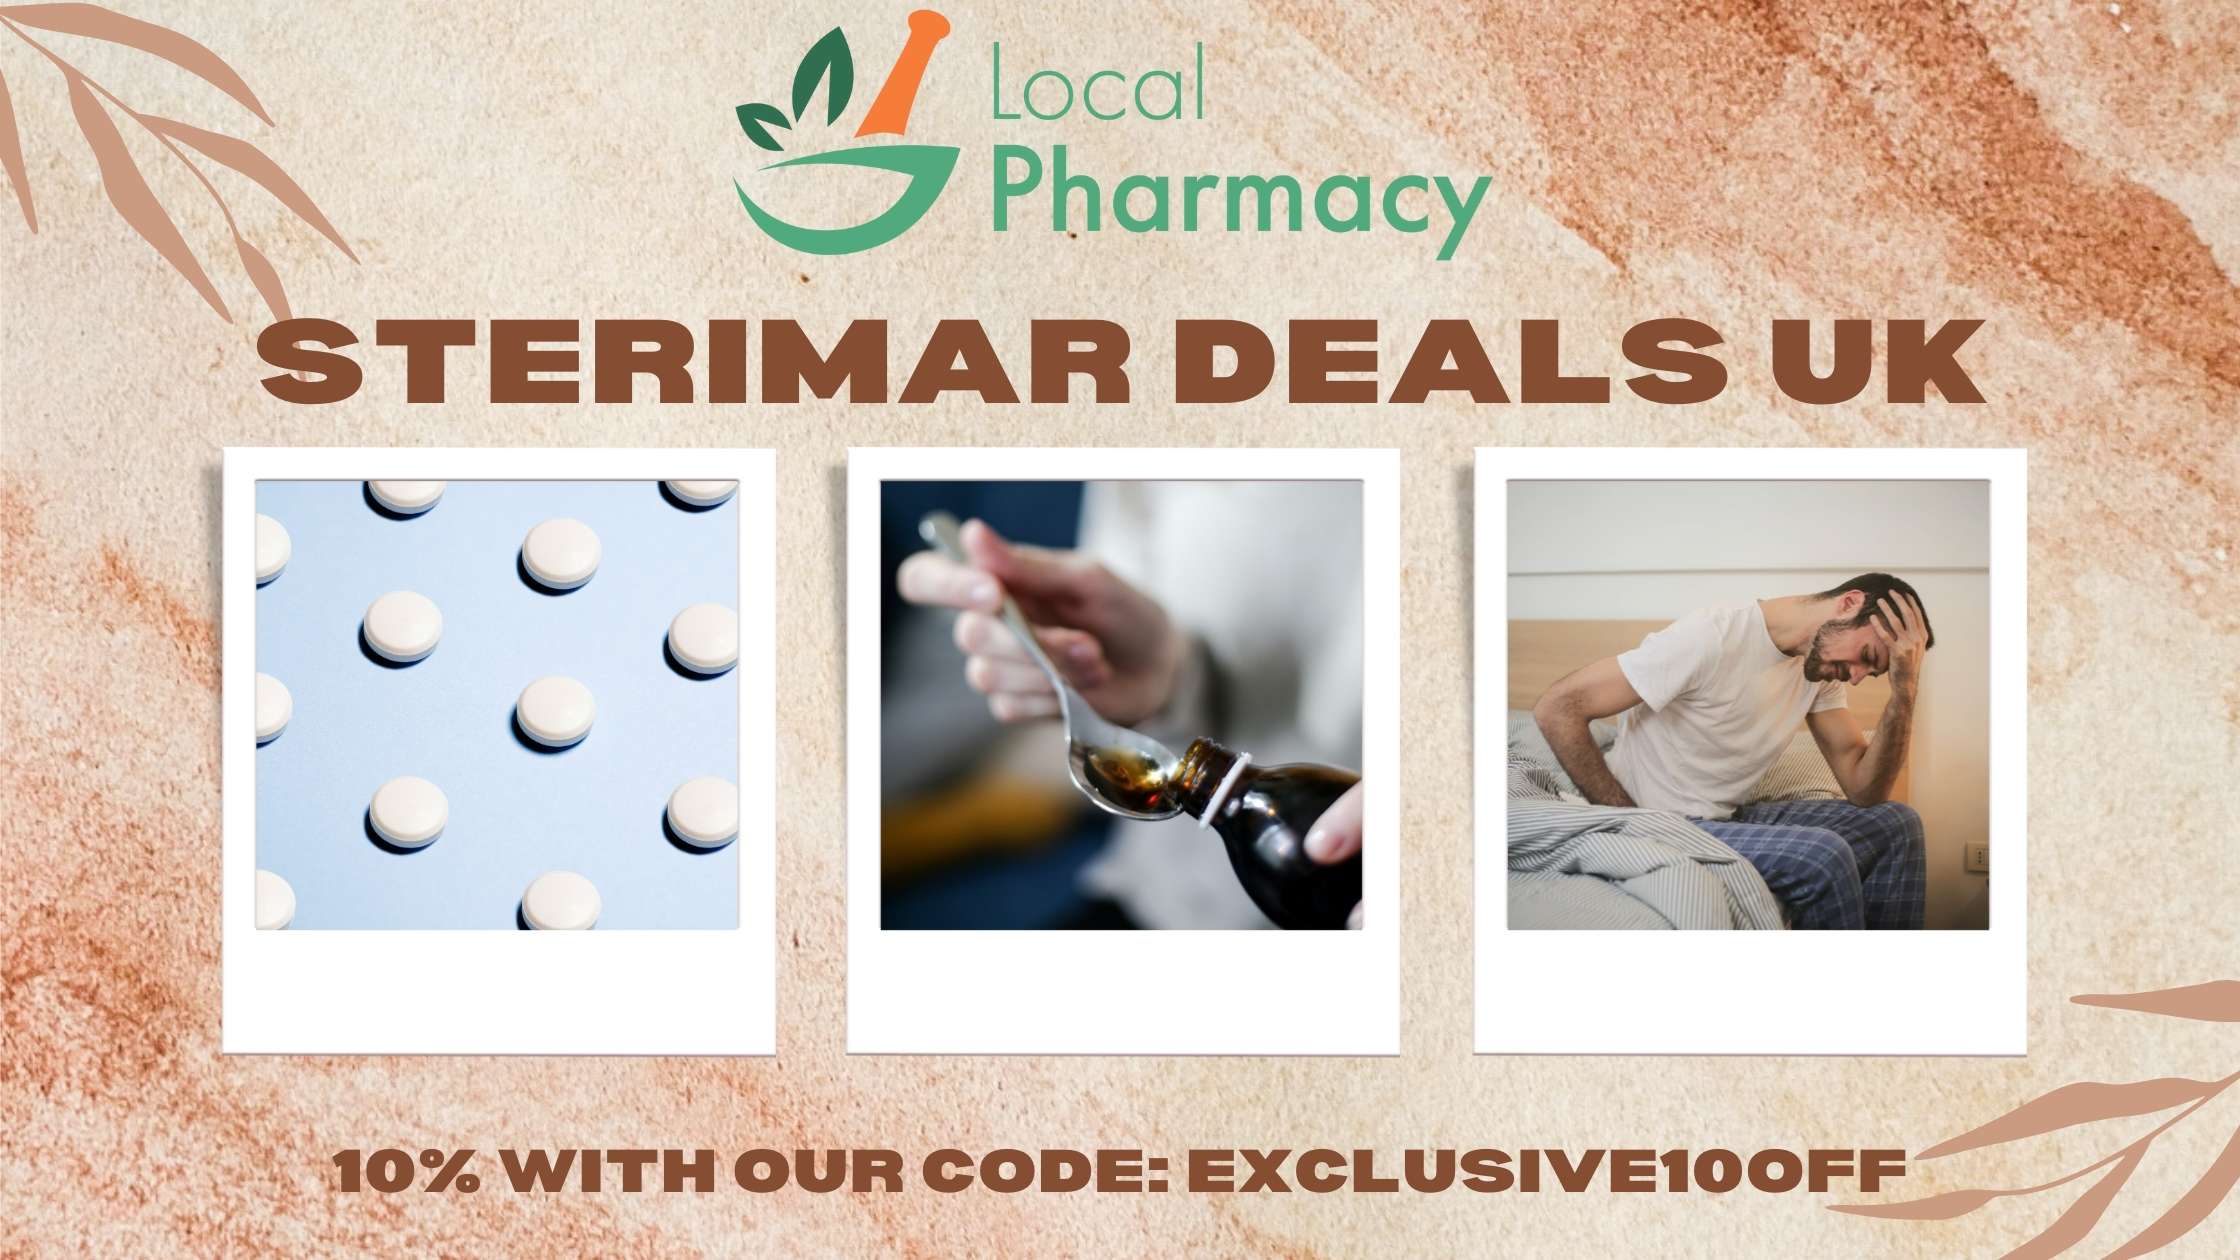 Sterimar coupon code and deals uk